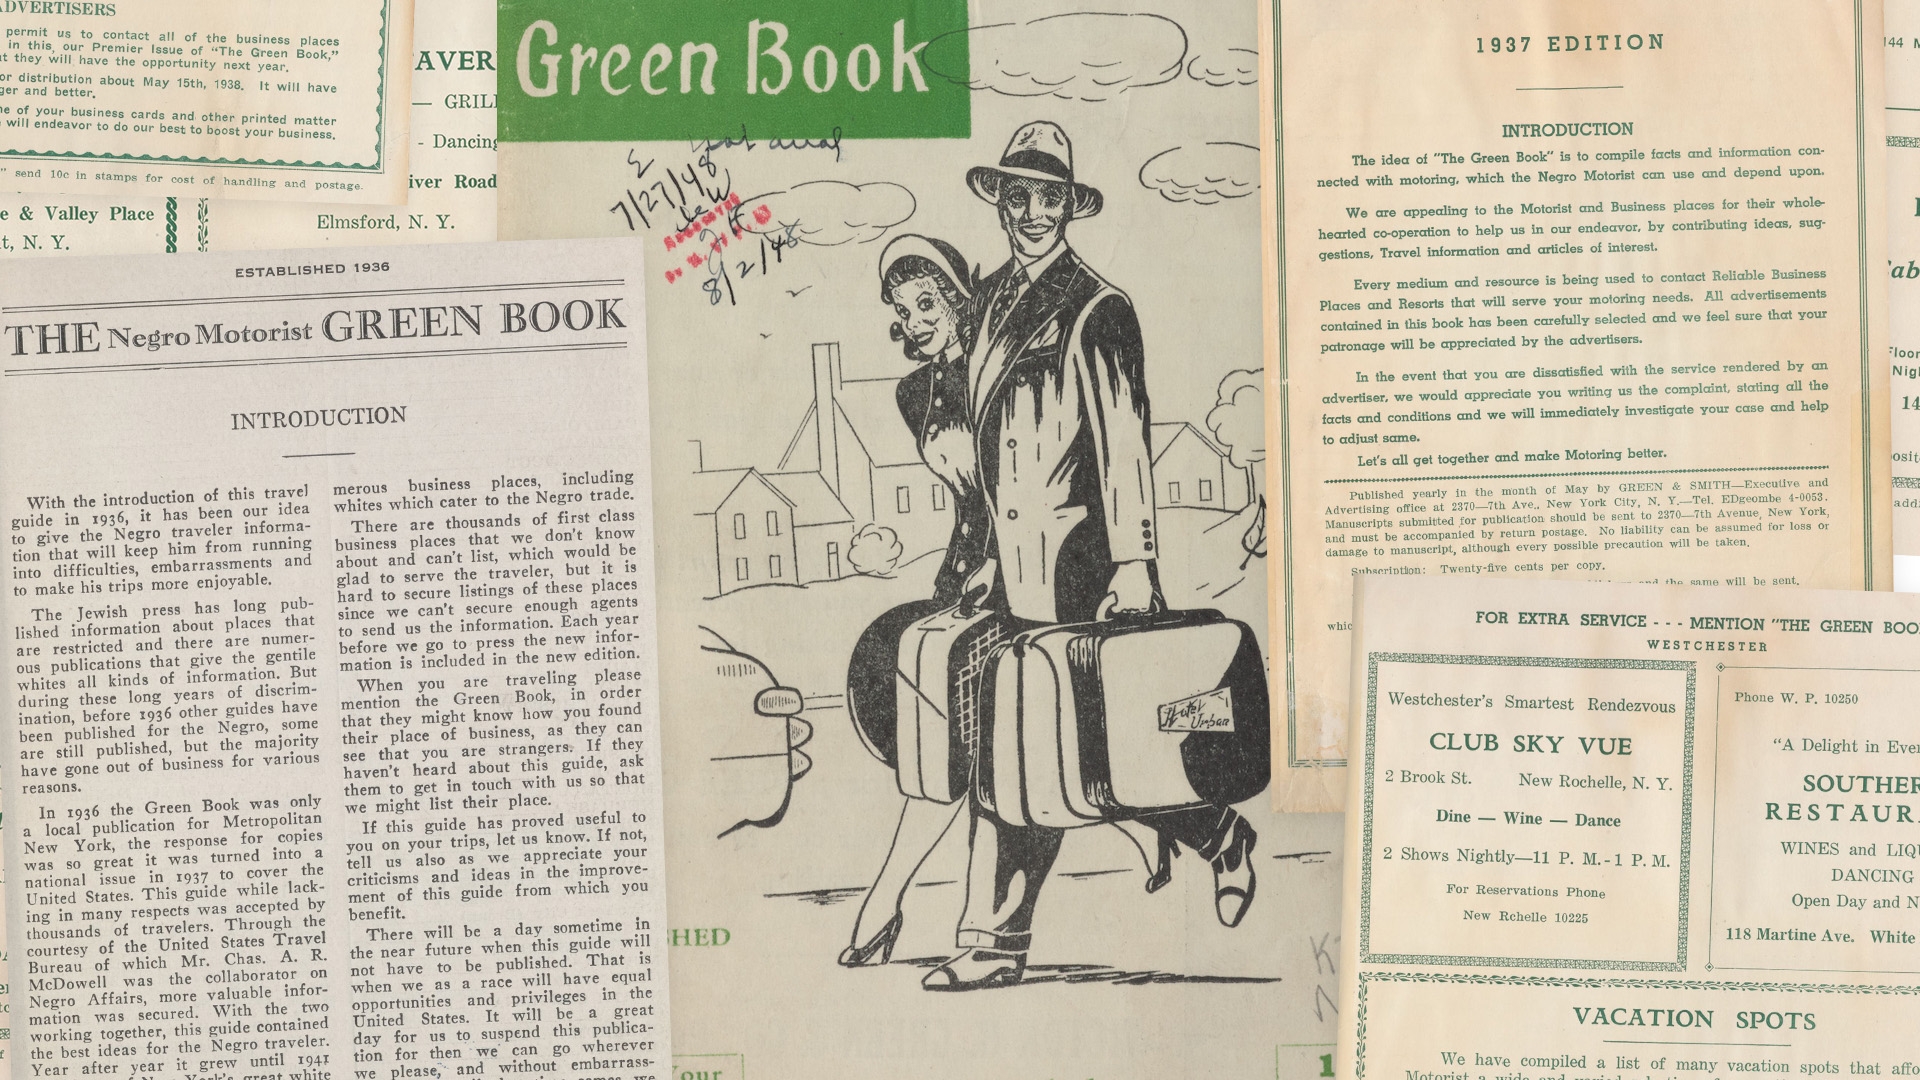 Collage of pages from The Green Book, an annual guidebook for African-American roadtrippers founded and published by New York City mailman Victor Hugo Green from 1936 to 1967.